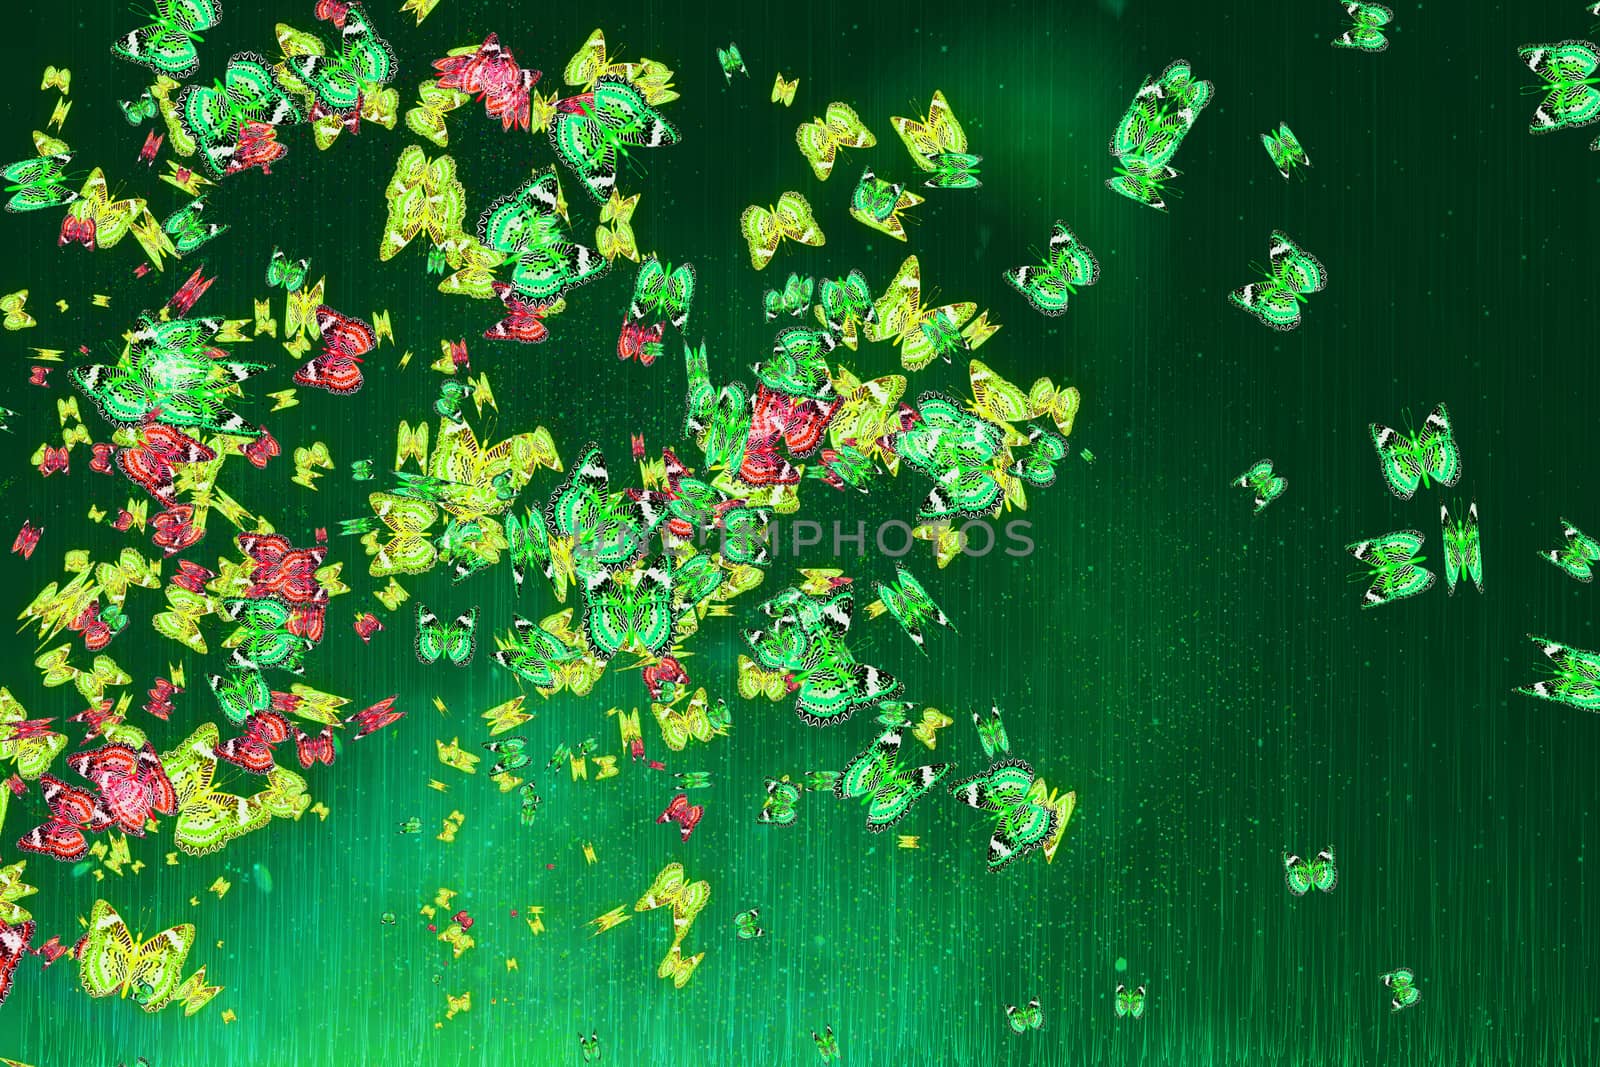 Green, yellow and pink butterflies on a dark green background